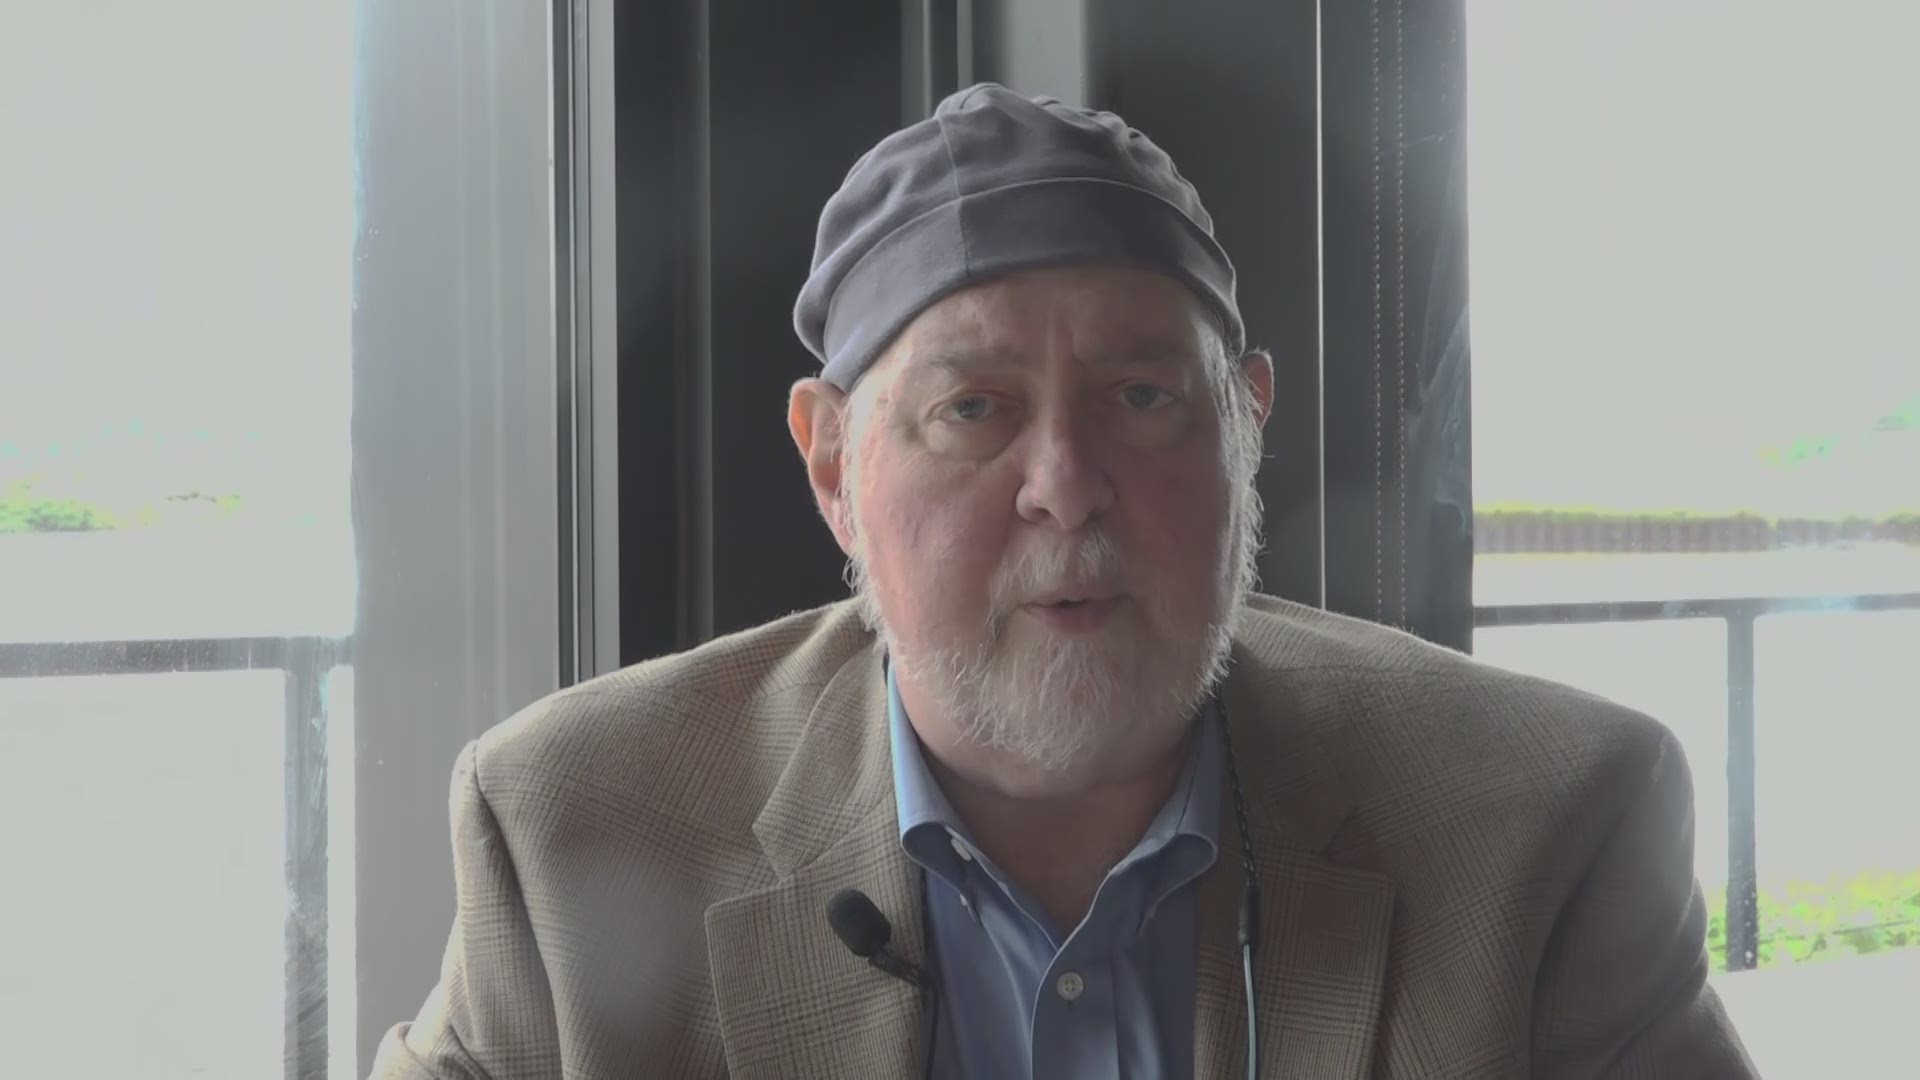 Longtime Cleveland food critic Joe Crea died Friday at the age of 68 following a battle with cancer. We present to you one of his last restaurant reviews, which he filmed for us late last year.